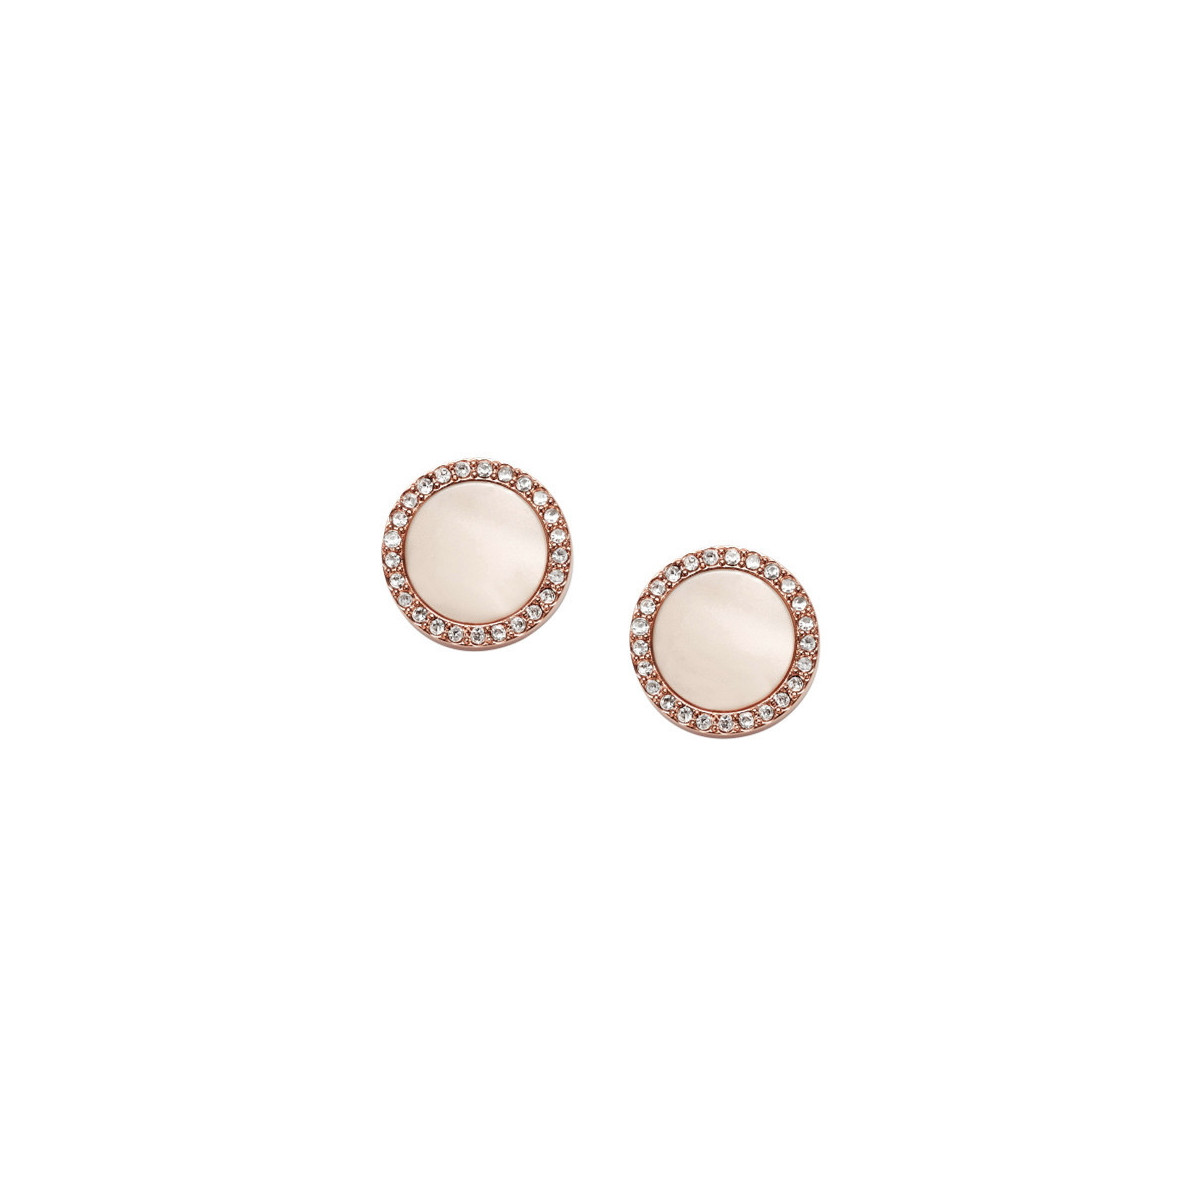 IVORY SHINY VAL BUTTON EARRINGS JF01715791